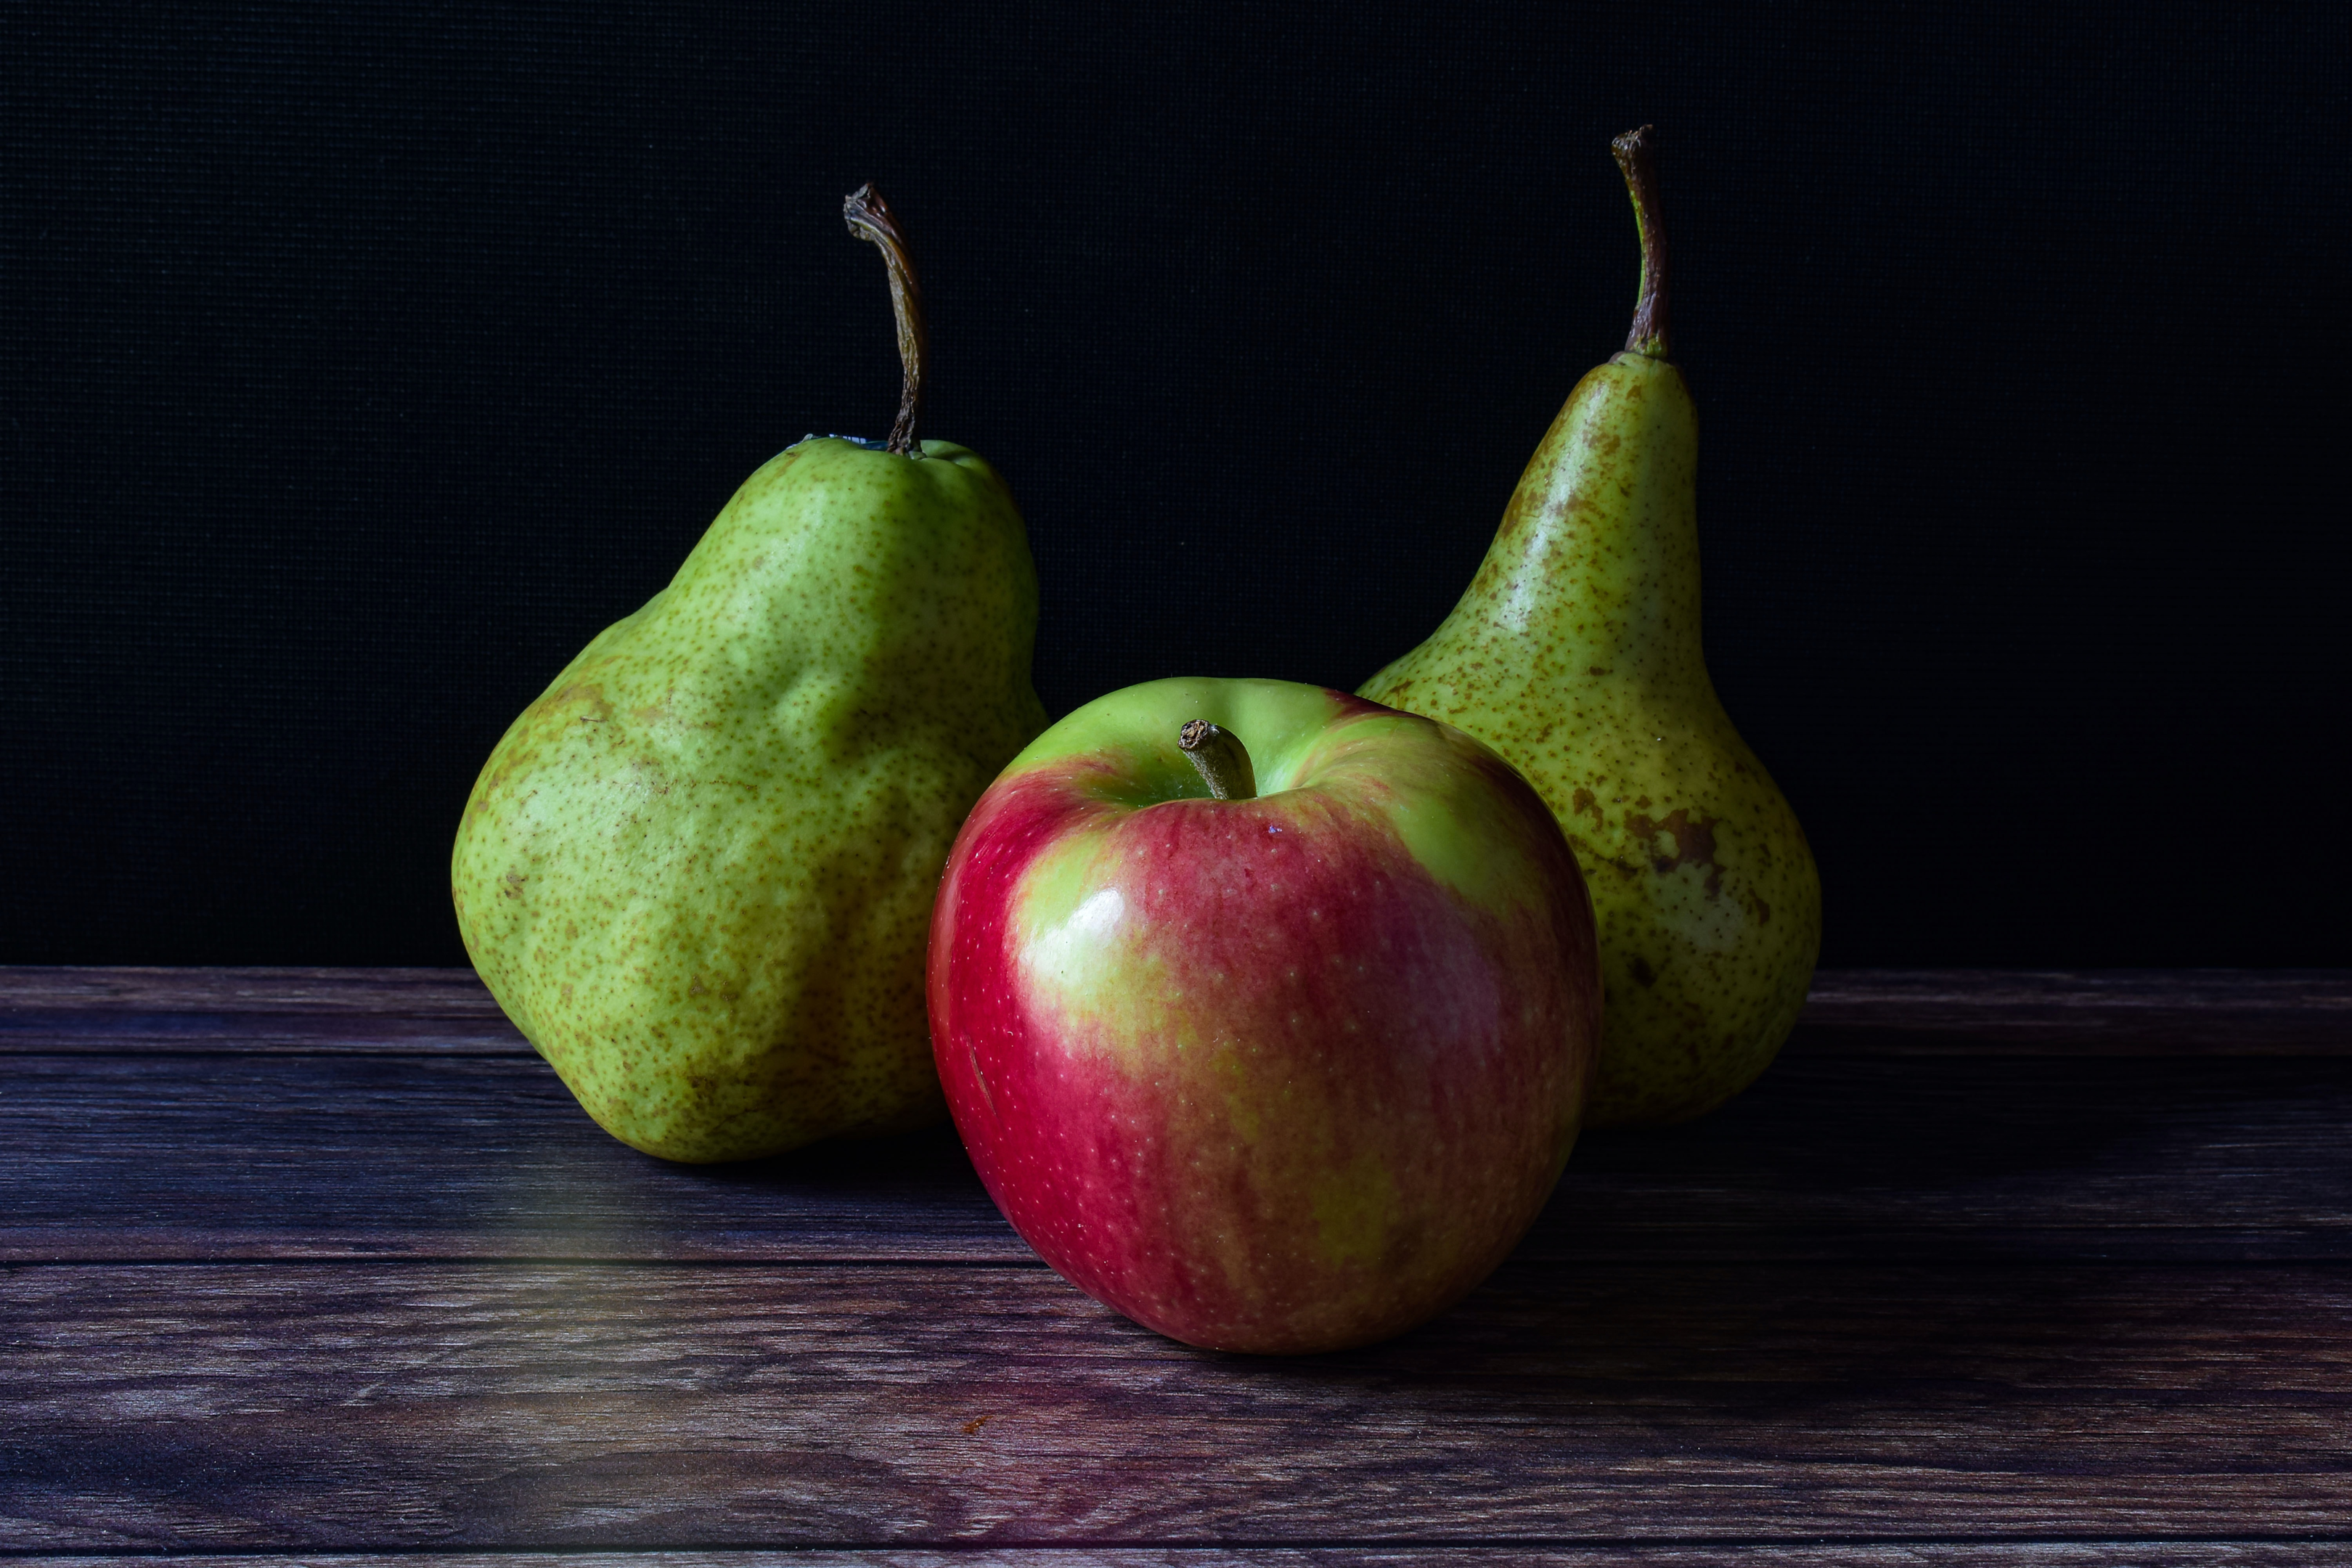 Pears and apples displayed together, showcasing delicious and nutritious fruits rich in fiber for a healthy diet and digestive support